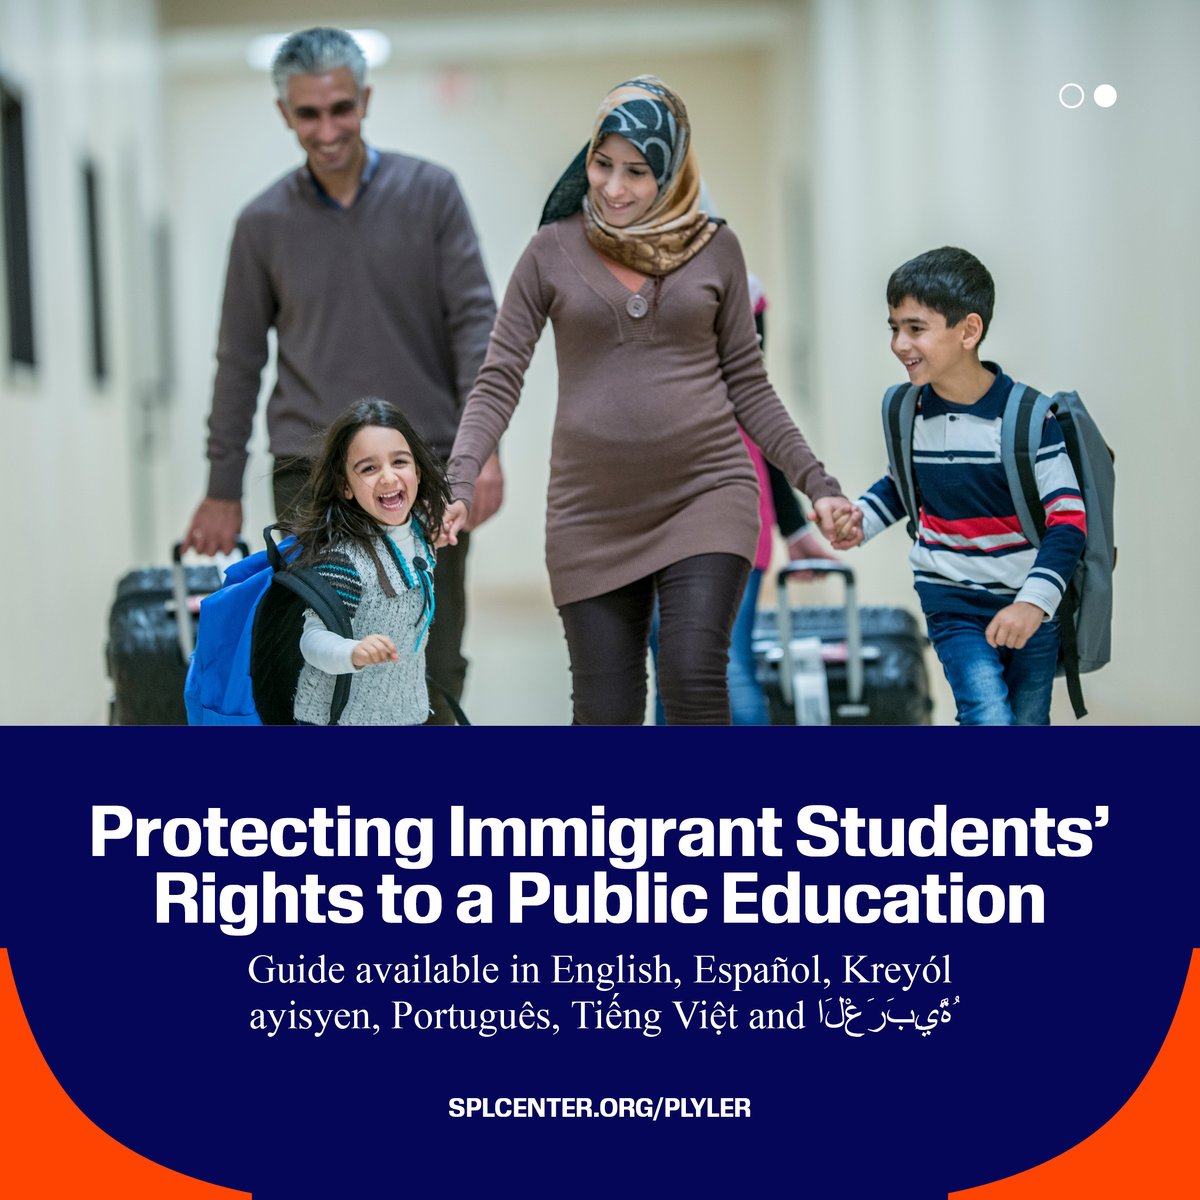 Access to #publiceducation is a right afforded to all students! The SPLC's #PlylerManual resources (available in English, Spanish, Haitian Creole & other languages) can help you advocate for students facing language access or enrollment barriers 📲: splcenter.org/plyler